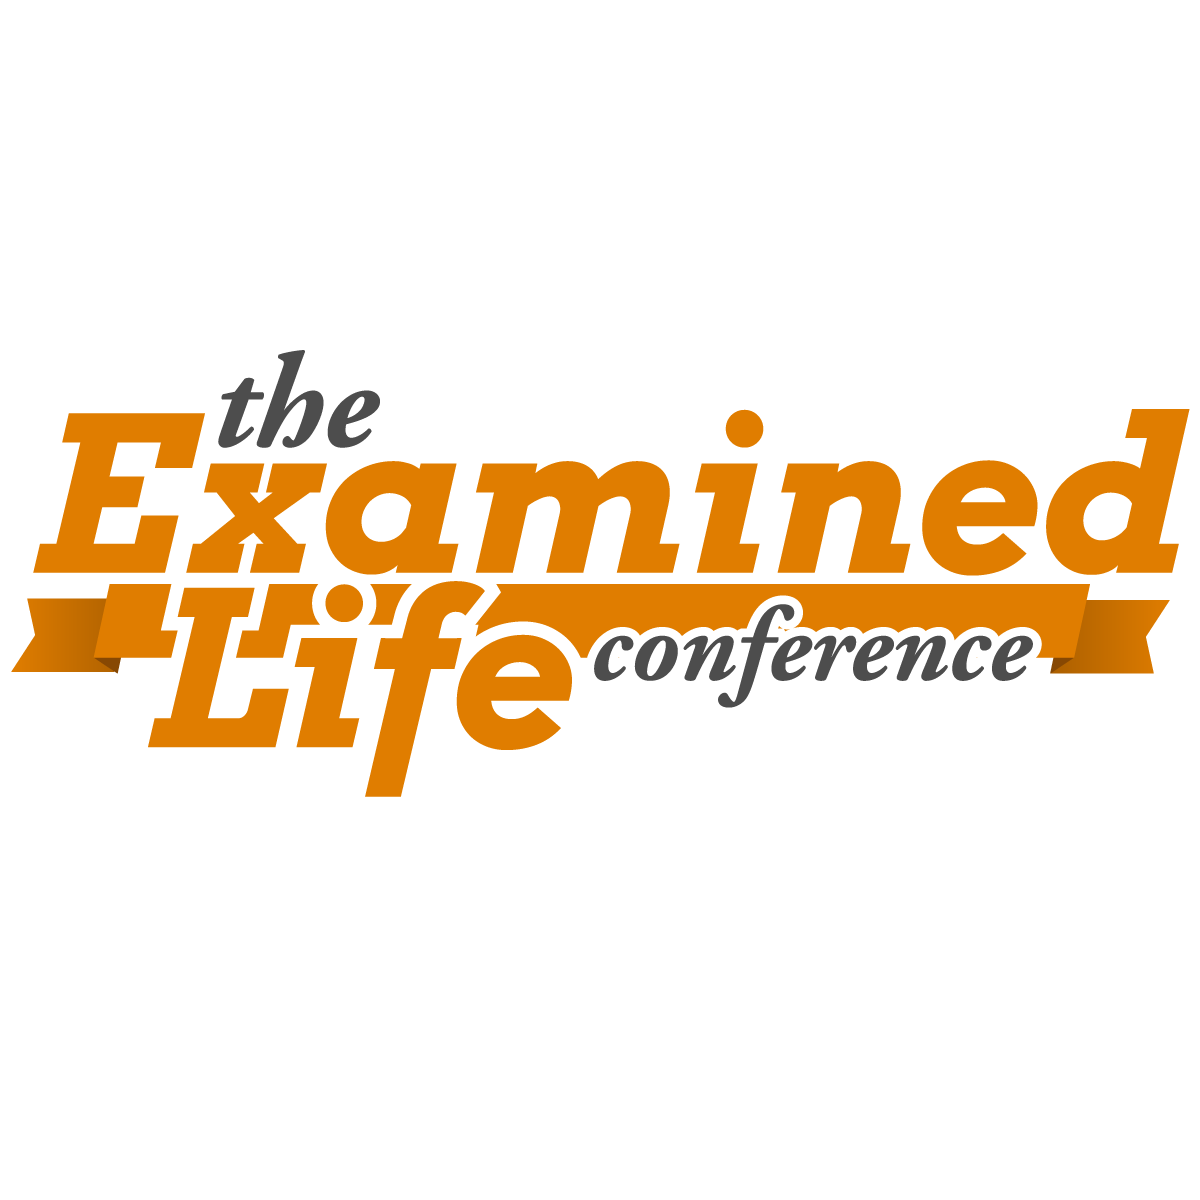 The Examined Life Conference: The Writing, Humanities, and Arts of Medicine promotional image